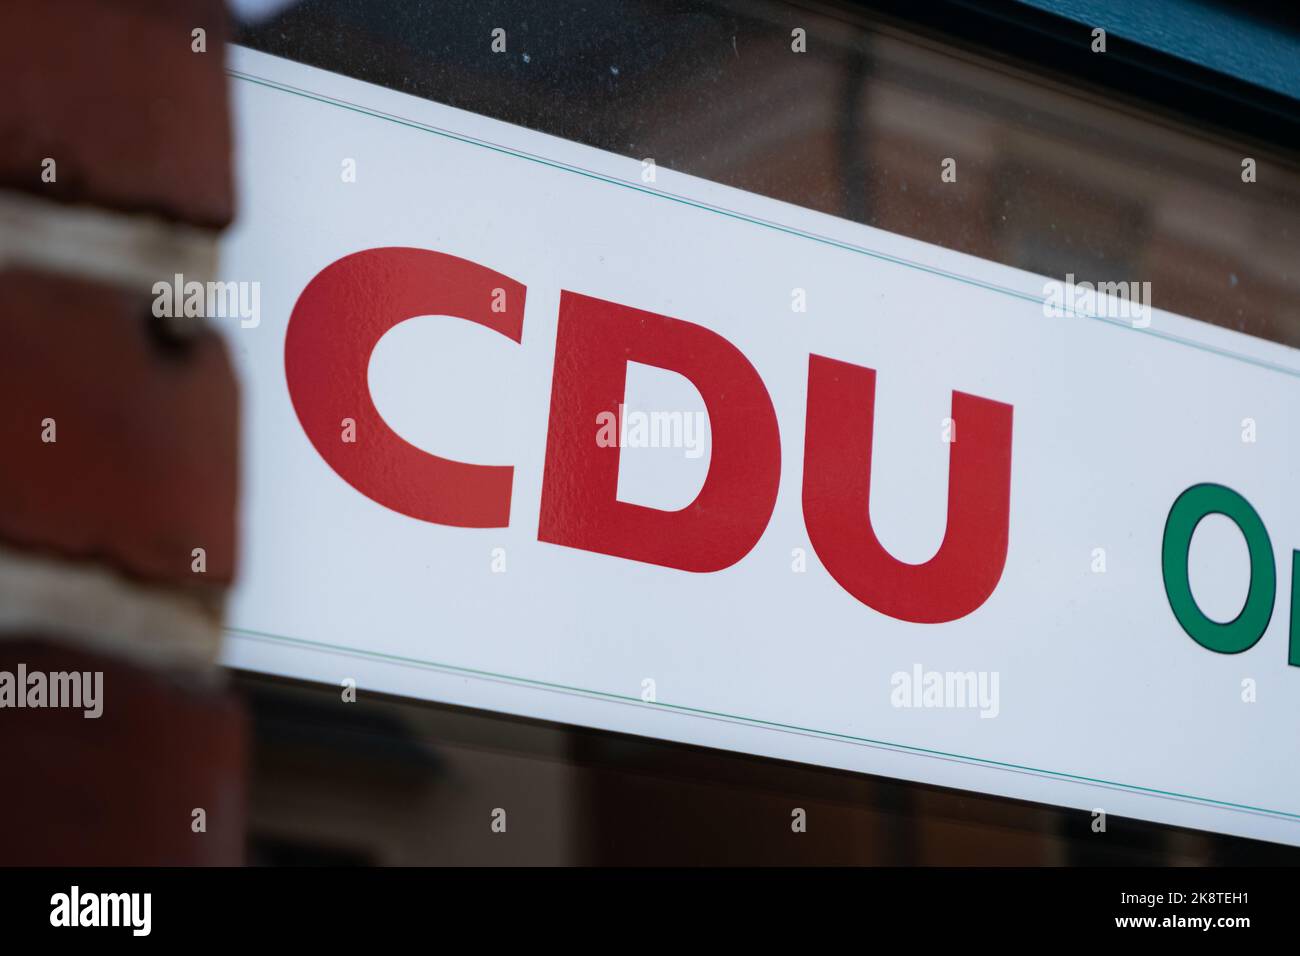 CDU logo on a building exterior. Advertising for a big German political party on a window glass of an office. CDU means Christian Democratic Union. Stock Photo